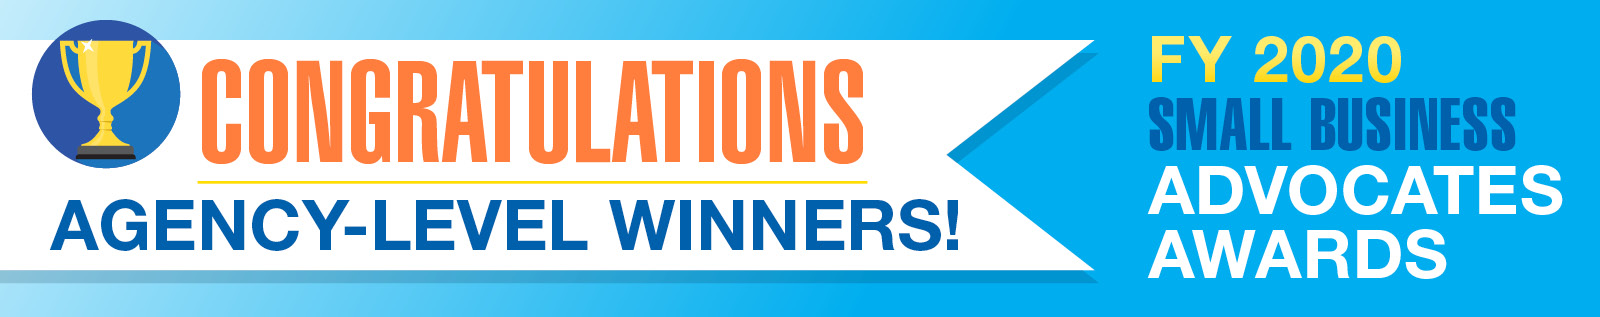 Congratulations Agency-Level Winners! FY 2020 Small Business Advocates Awards